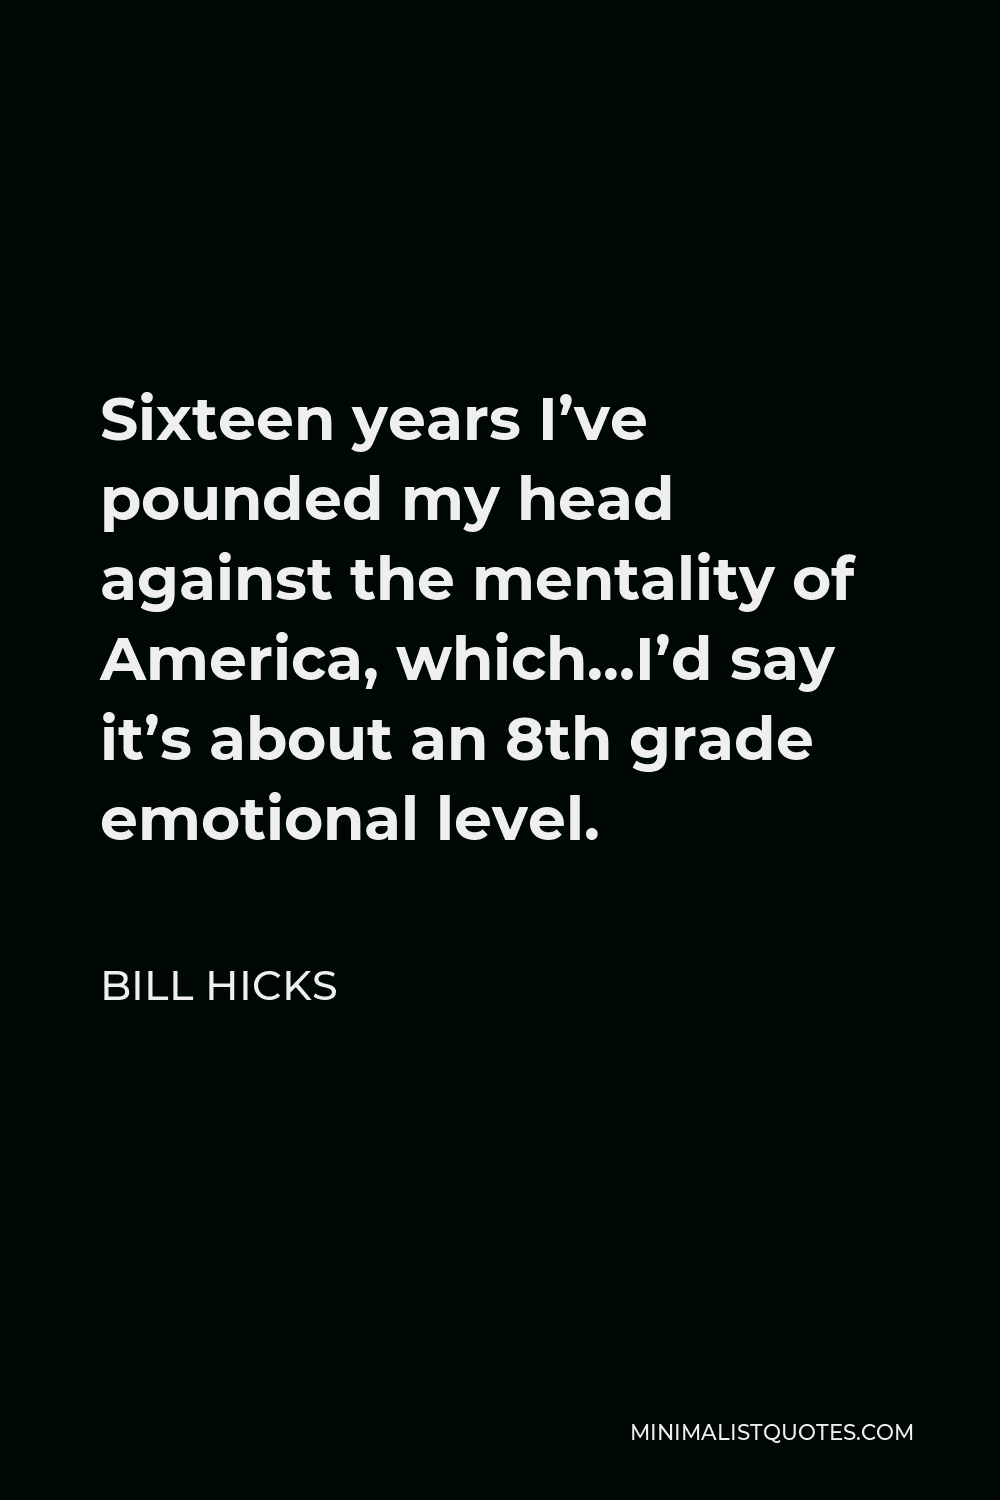 Bill Hicks Quote - Sixteen years I’ve pounded my head against the mentality of America, which…I’d say it’s about an 8th grade emotional level.